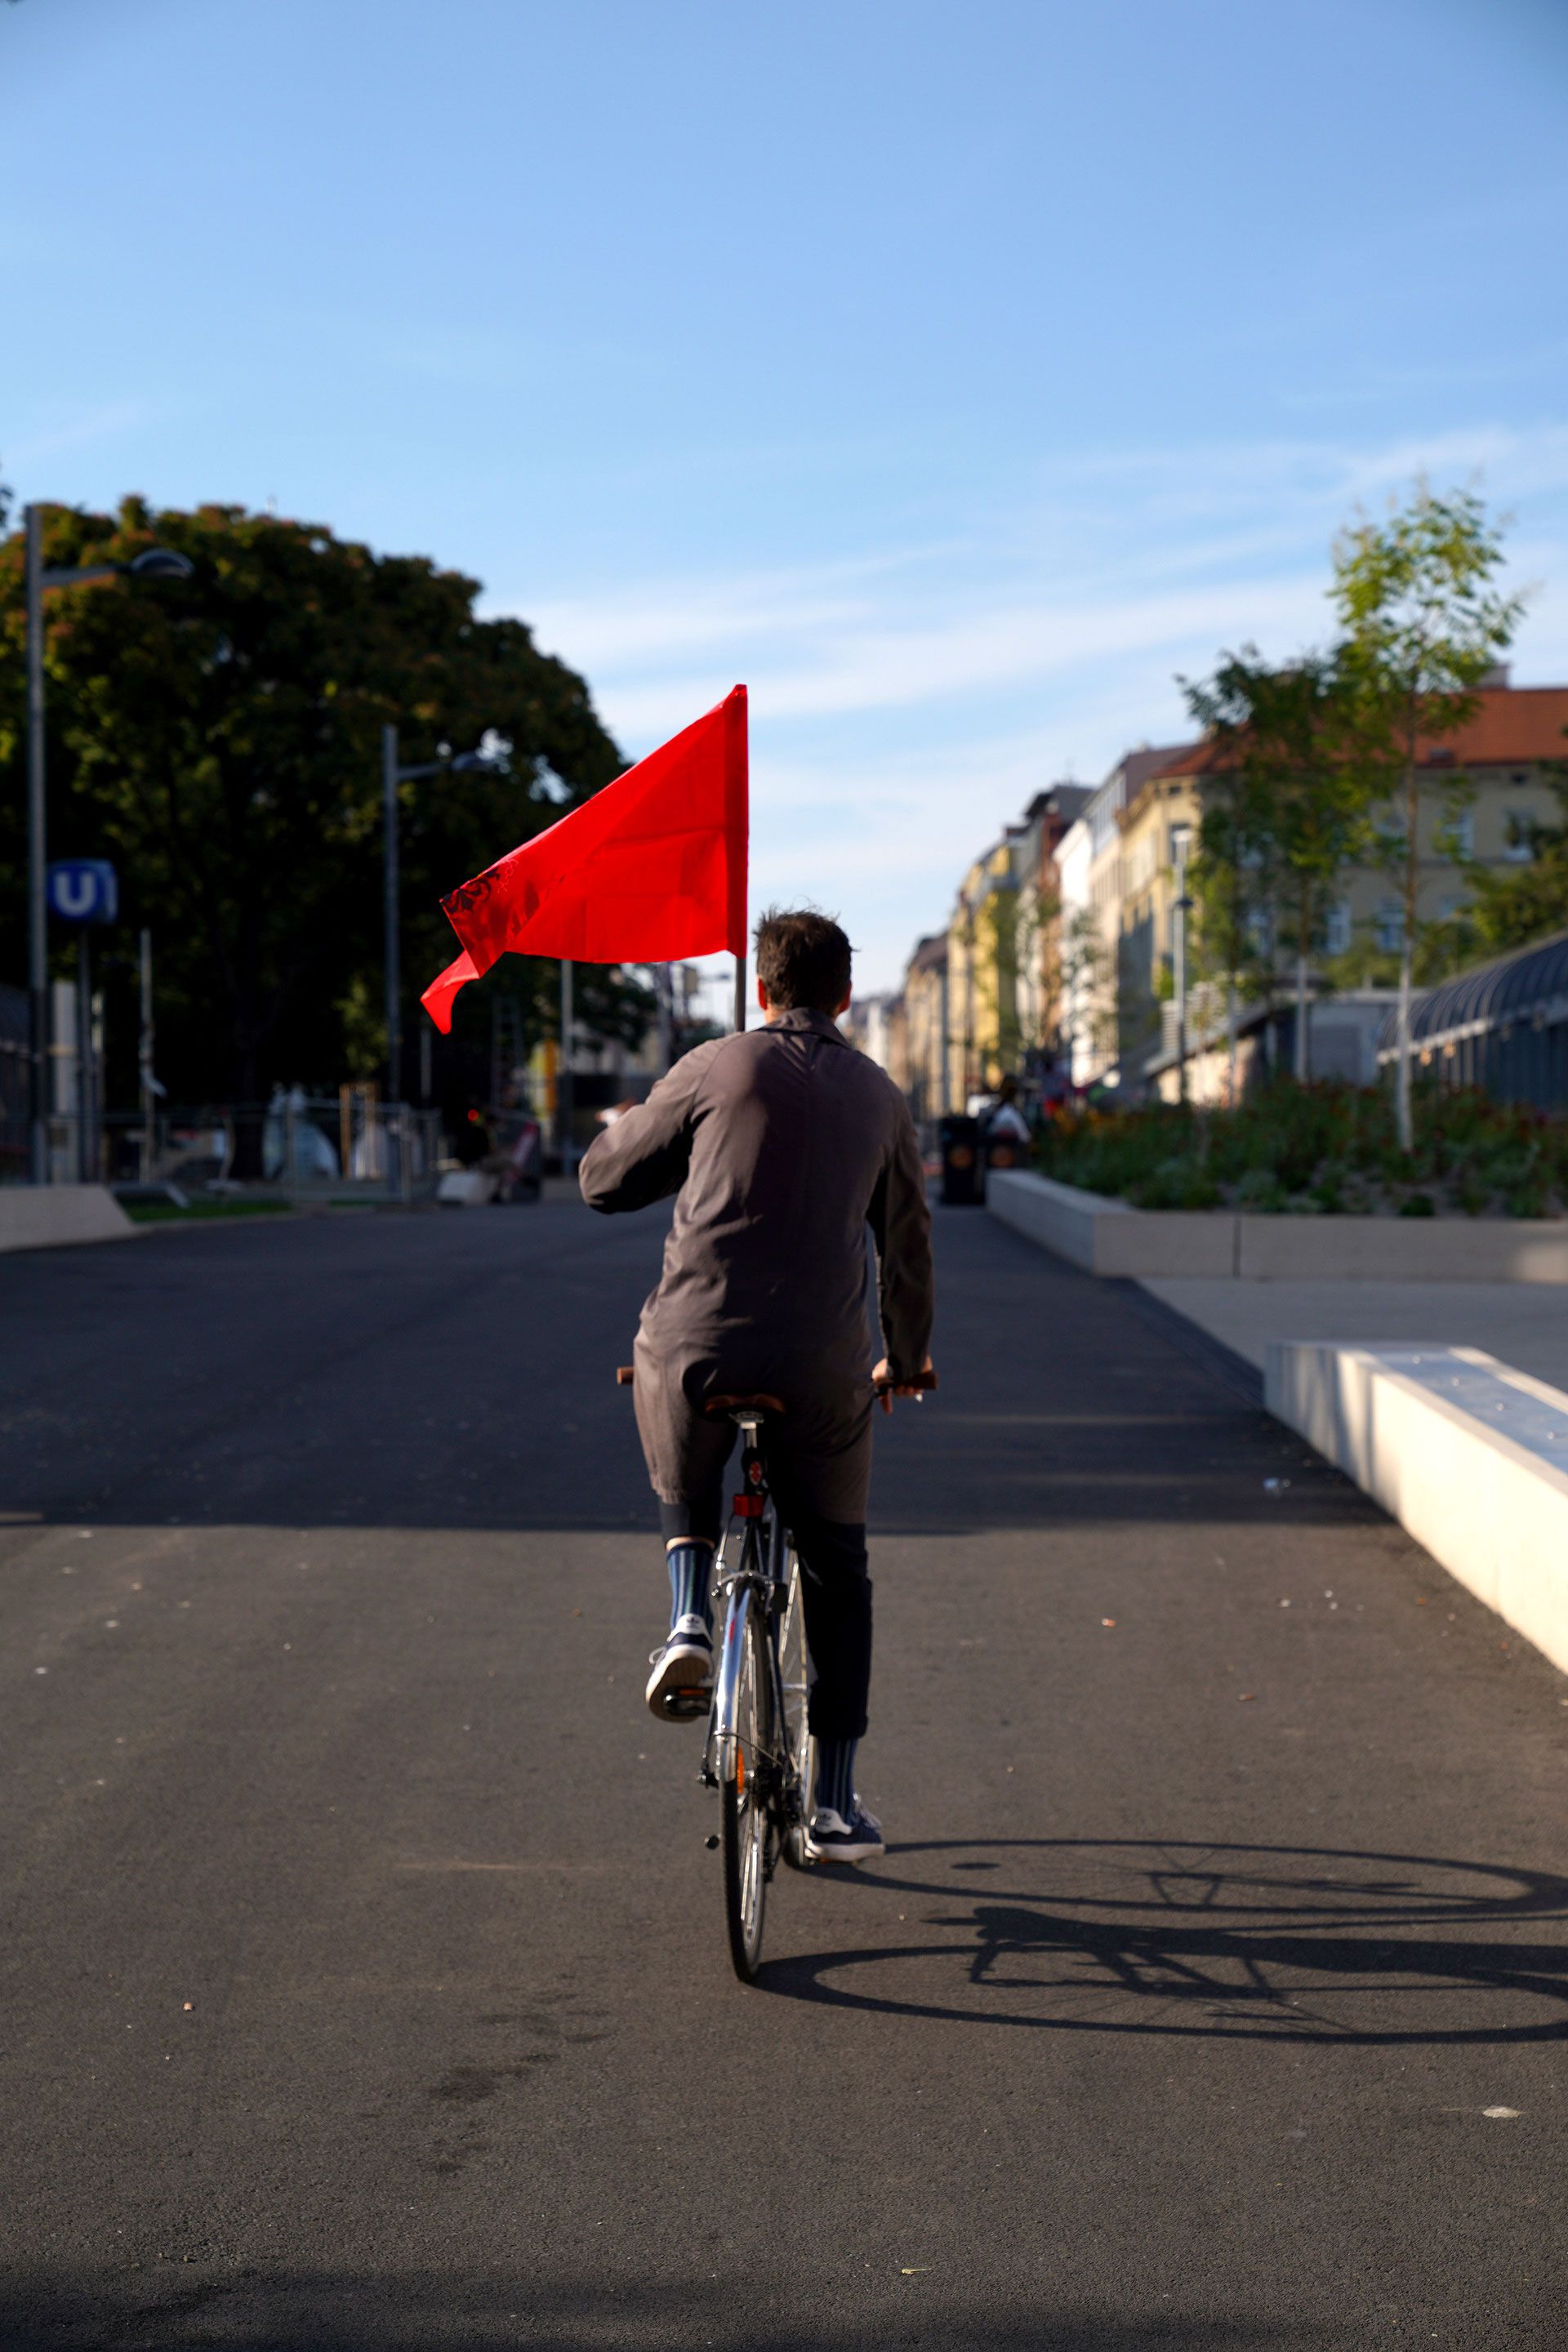 Festival of Minimal Actions,, re-performance of Igor Grubic – ,Bicycle and Flag,, Kunsthalle Wien, Vienna, 2020